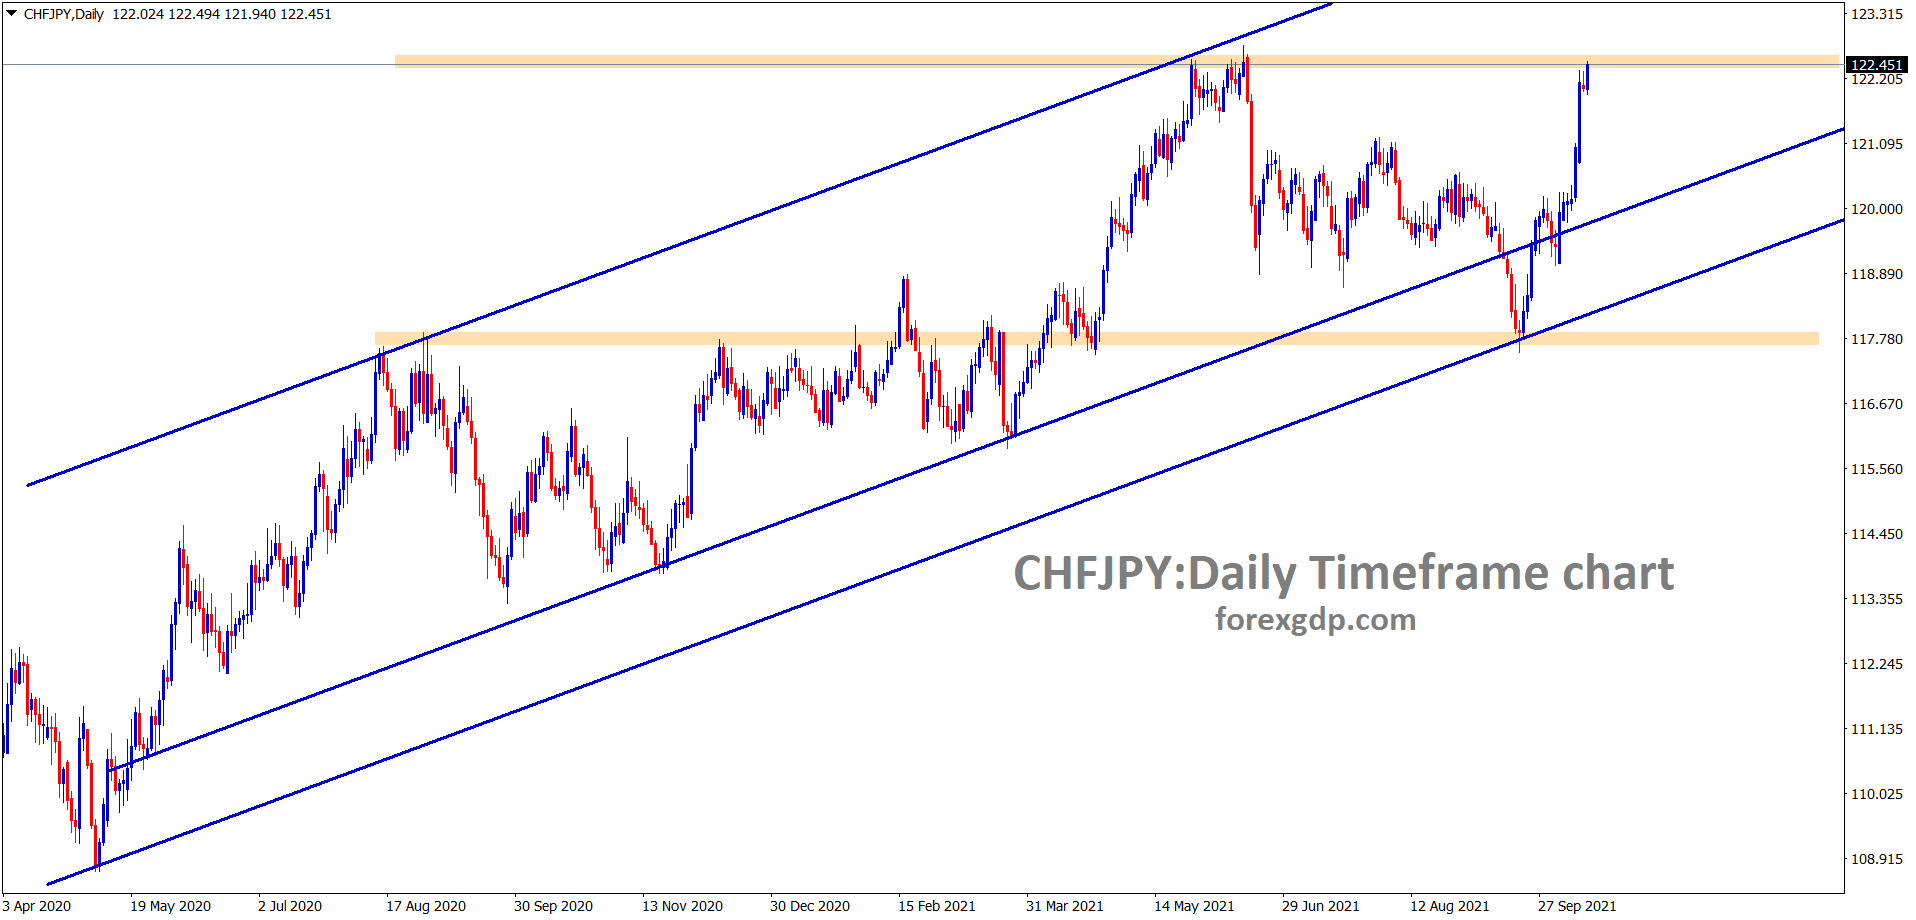 CHFJPY hits the resistance area again wait for breakout or reversal